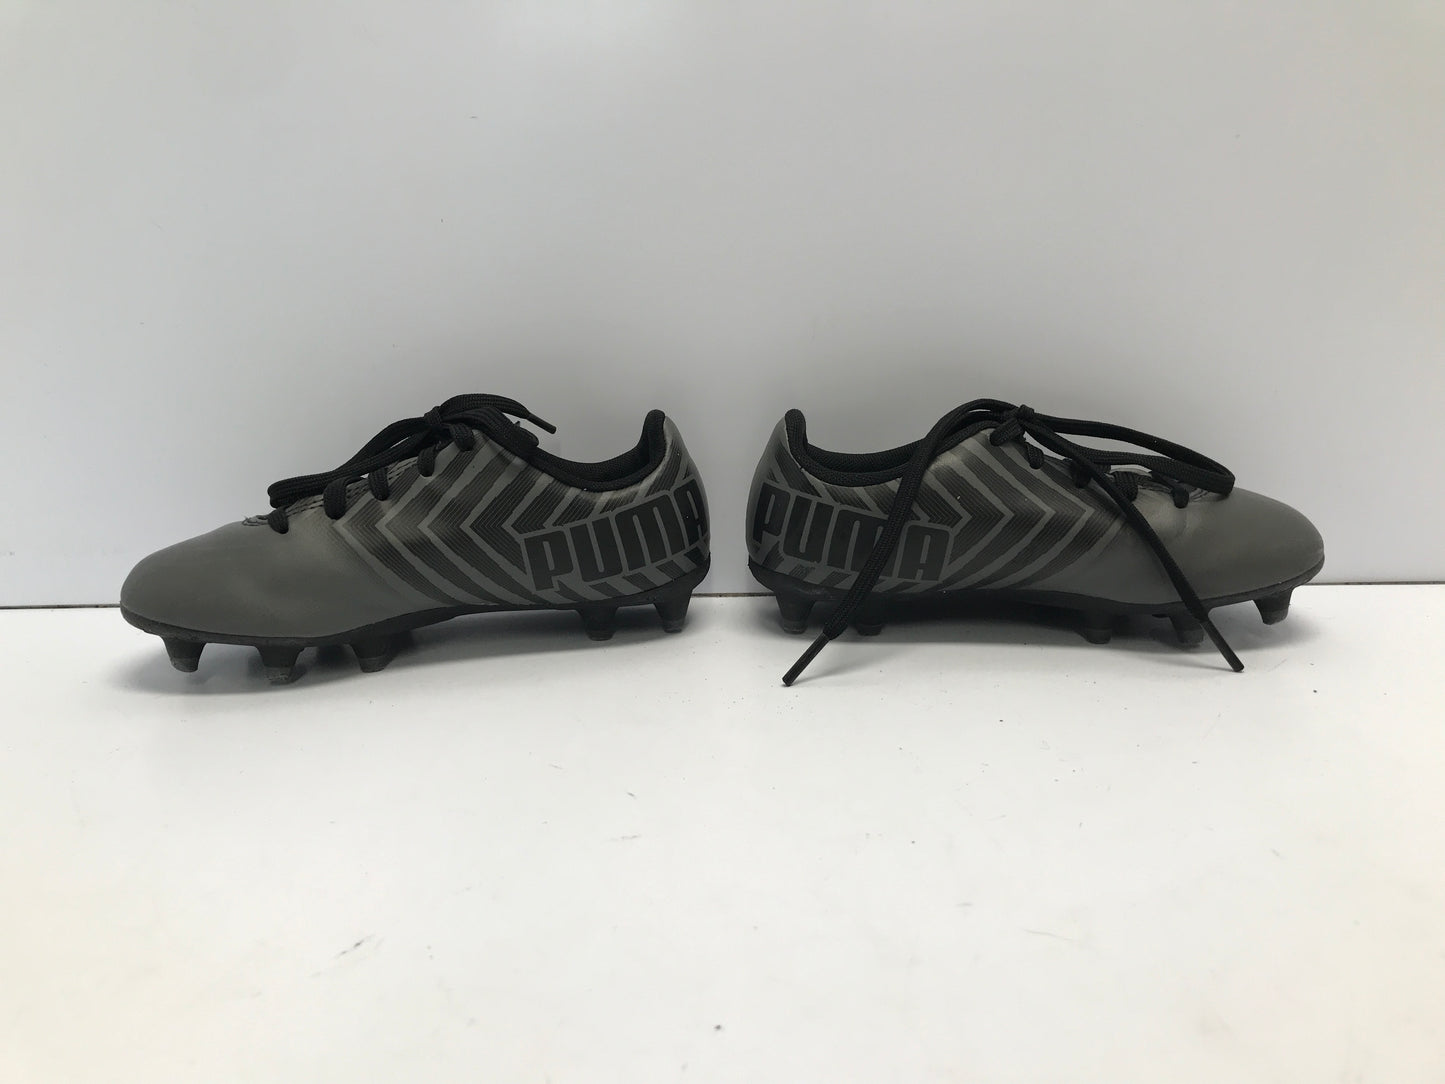 Soccer Shoes Cleats Child Size 12 Puma Black Grey Like New